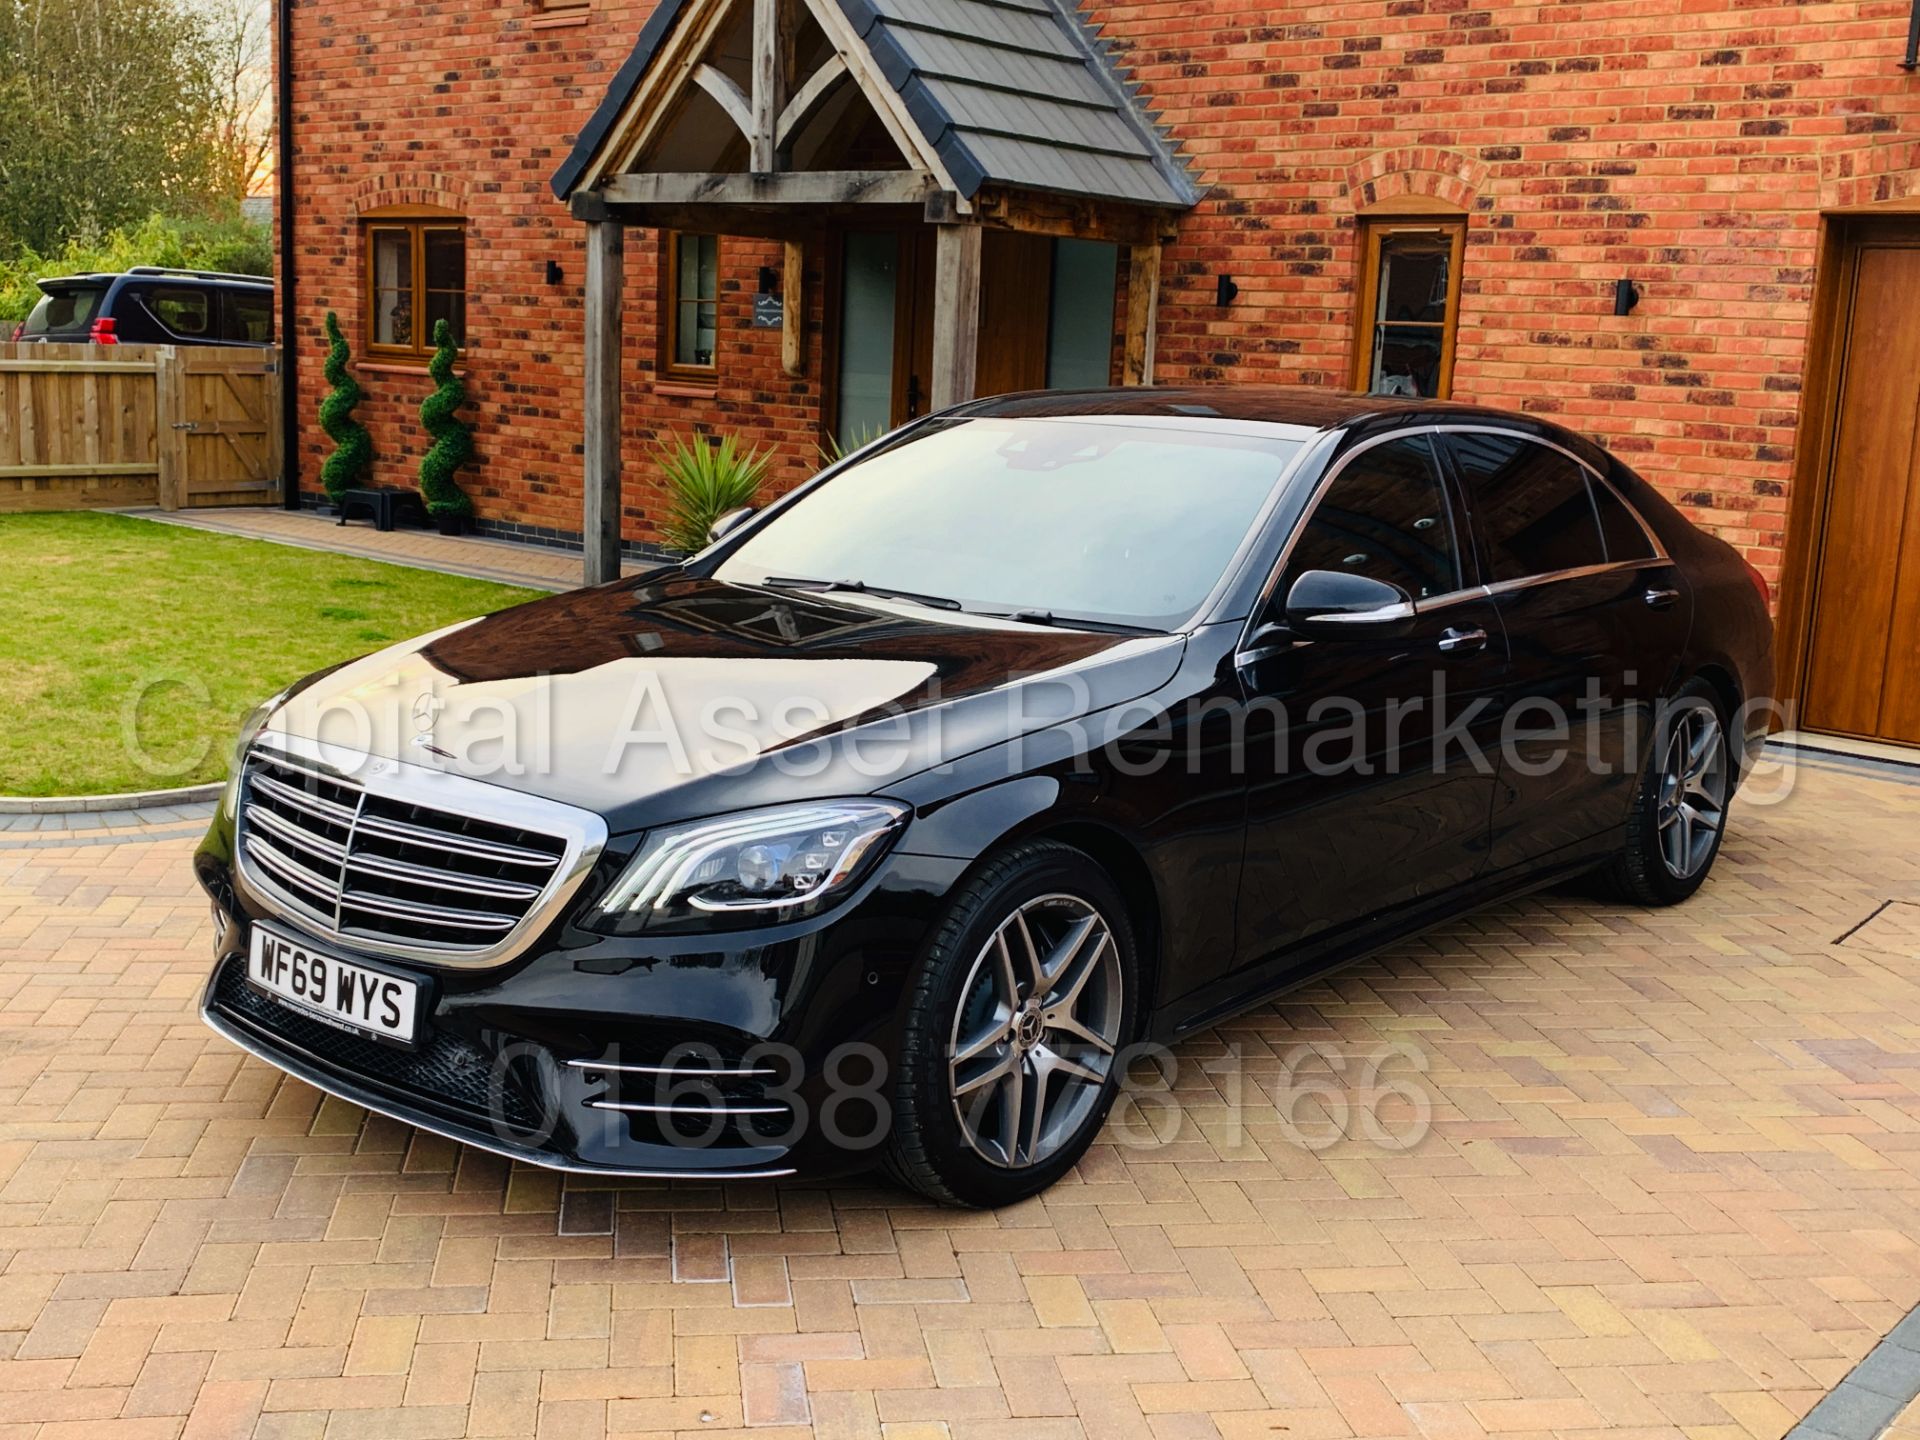 (On Sale) MERCEDES-BENZ S350d LWB *AMG - LUXURY SALOON* (69 REG) 9-G TRONIC AUTO *TOP OF THE RANGE* - Image 7 of 66